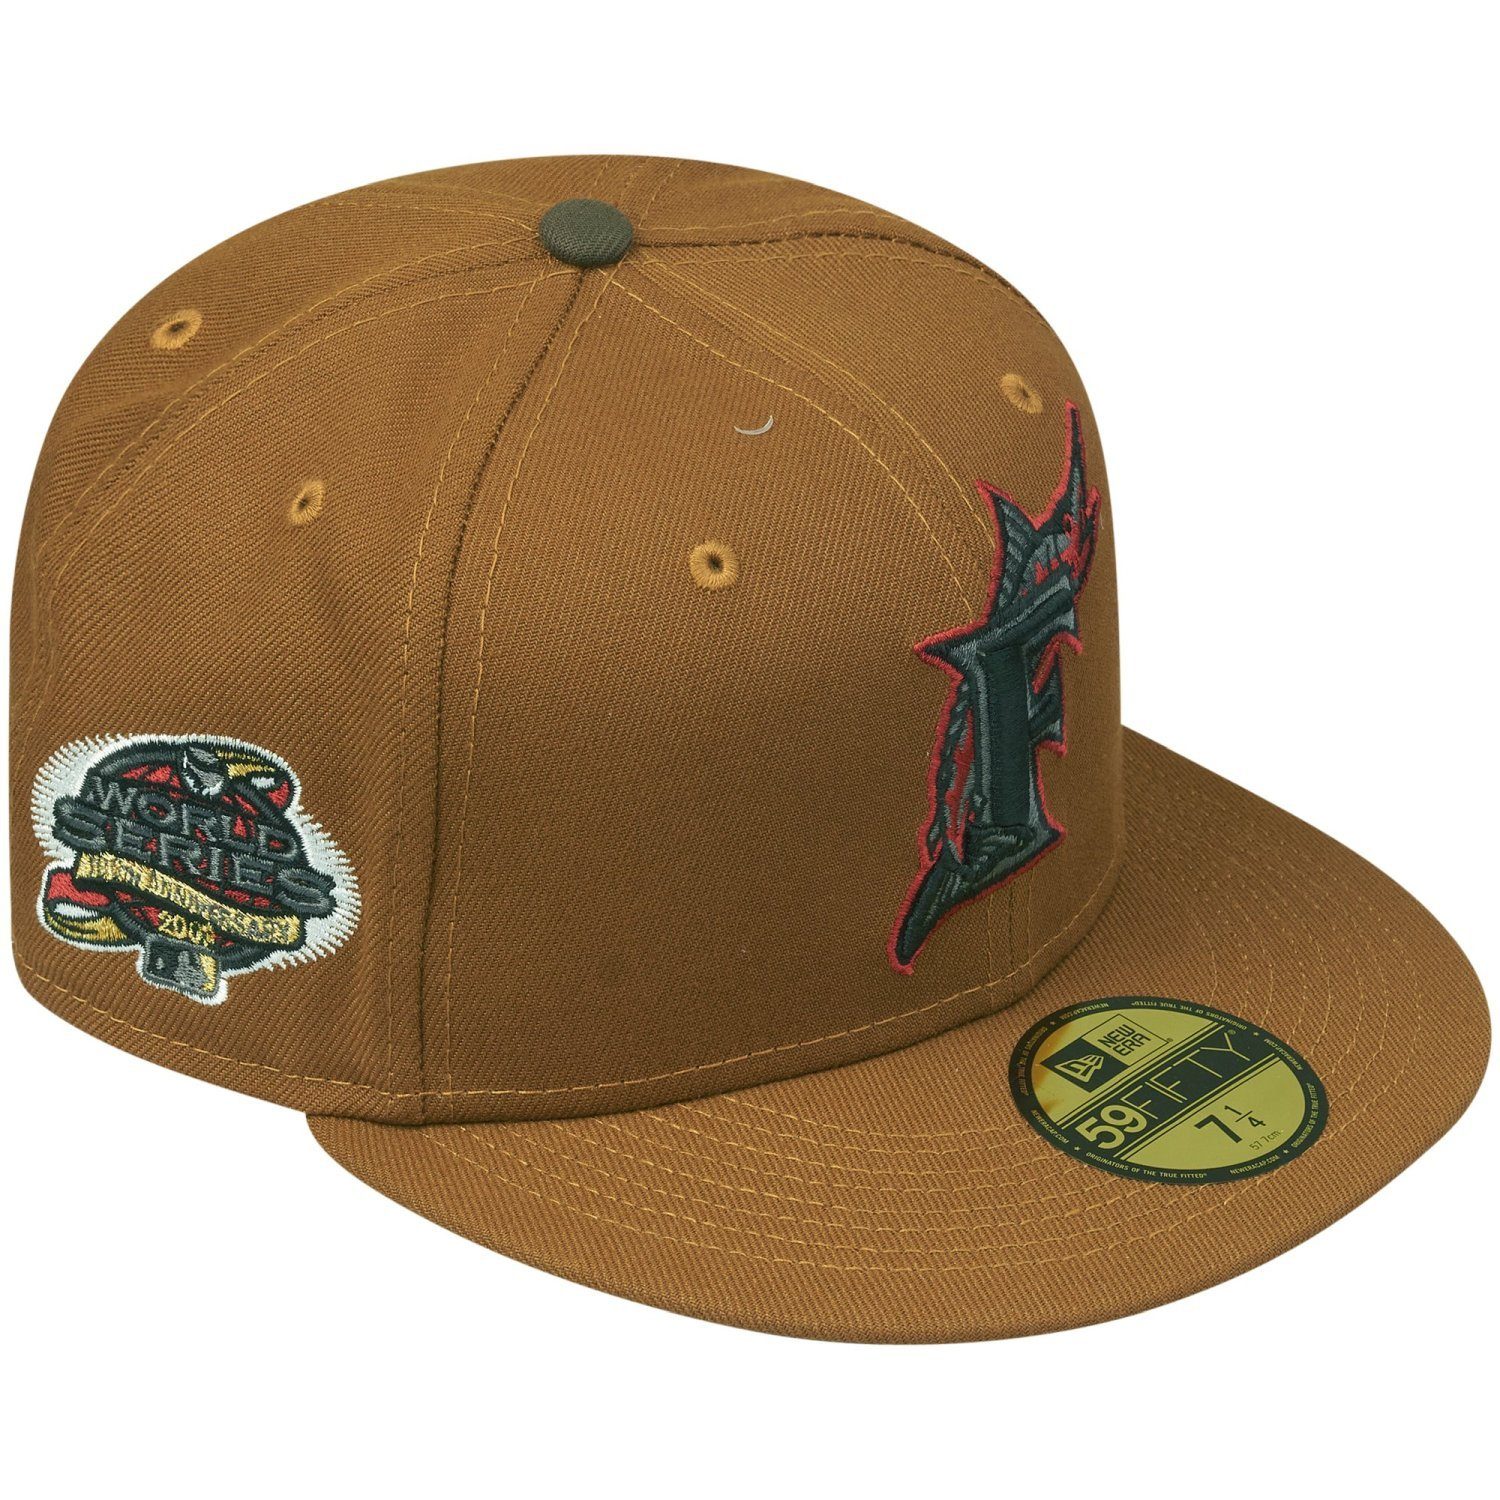 Cap Fitted SERIES 2003 WORLD Florida New Era 59Fifty Marlins